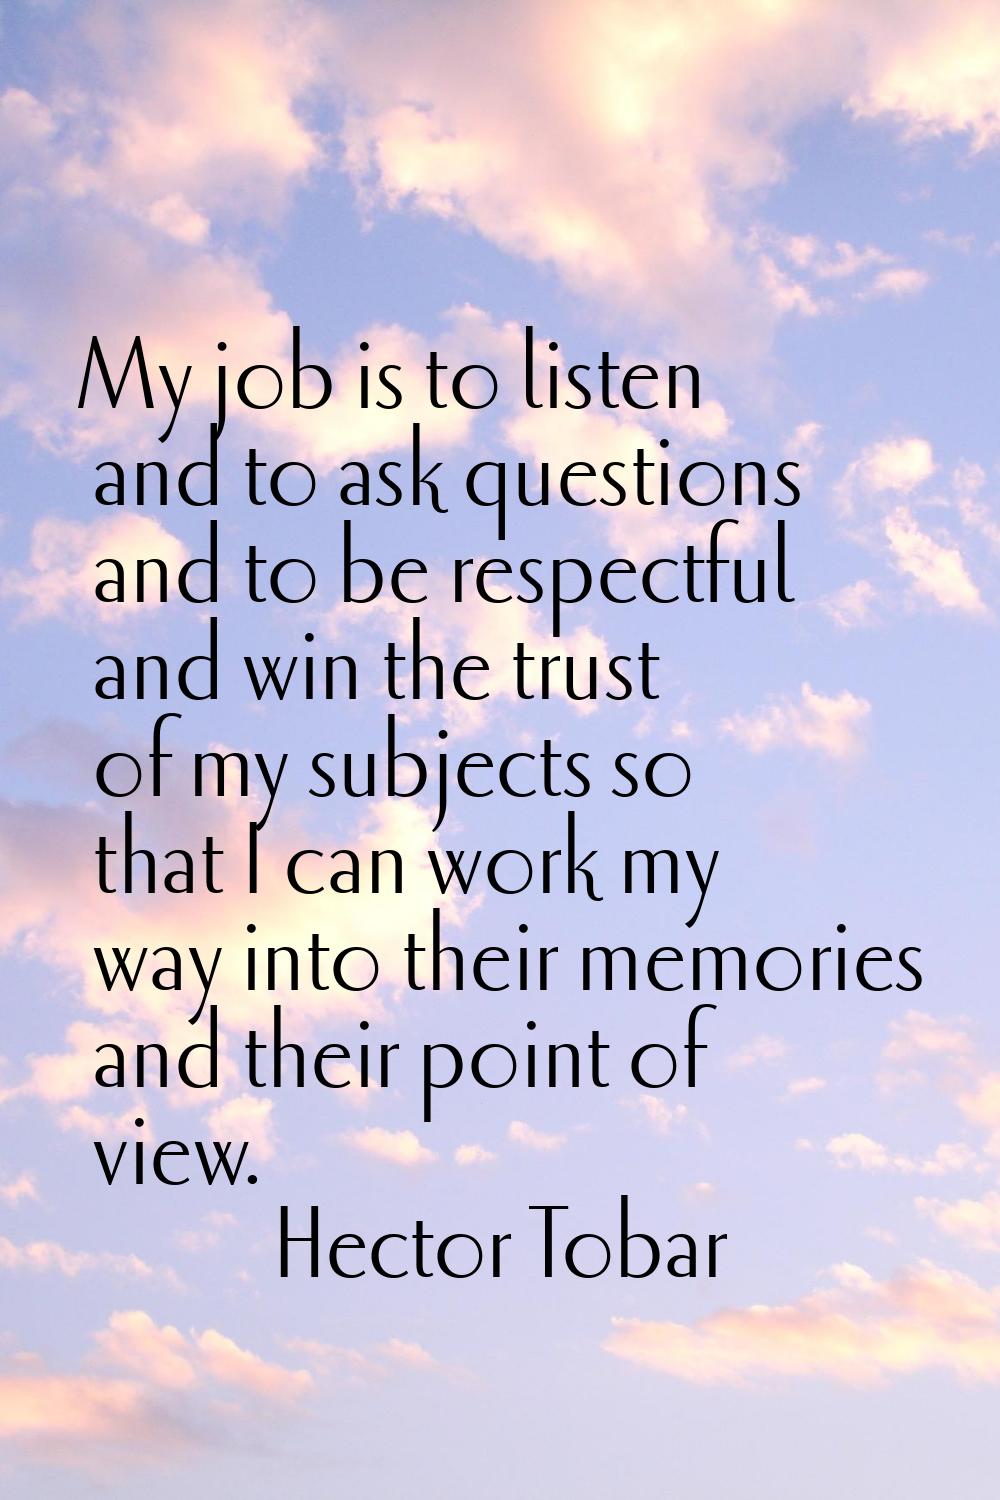 My job is to listen and to ask questions and to be respectful and win the trust of my subjects so t